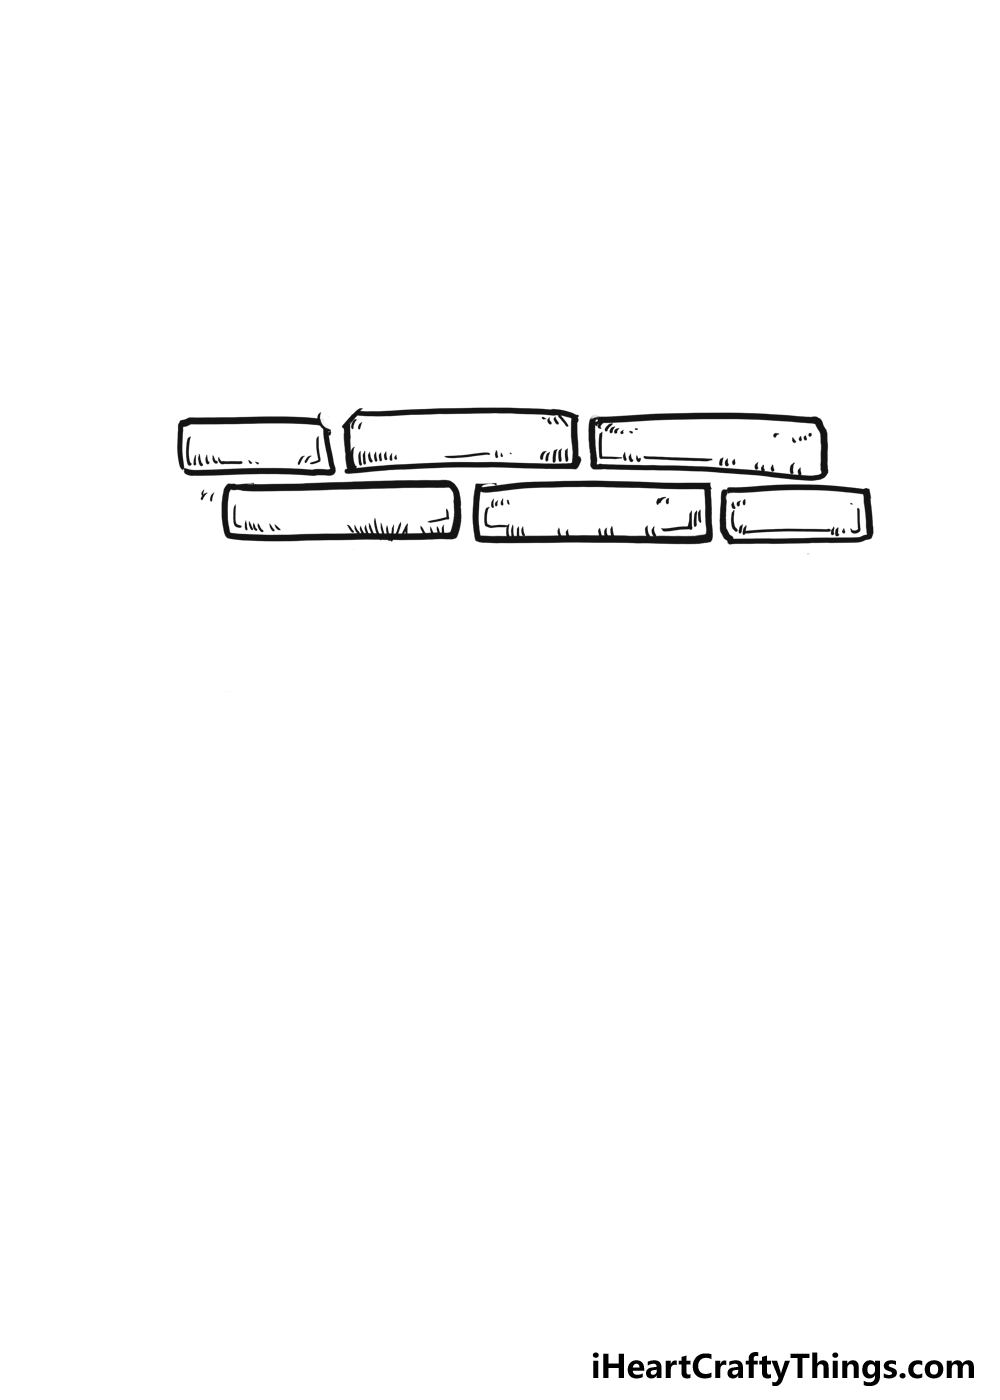 How to Draw A Brick Wall step 3